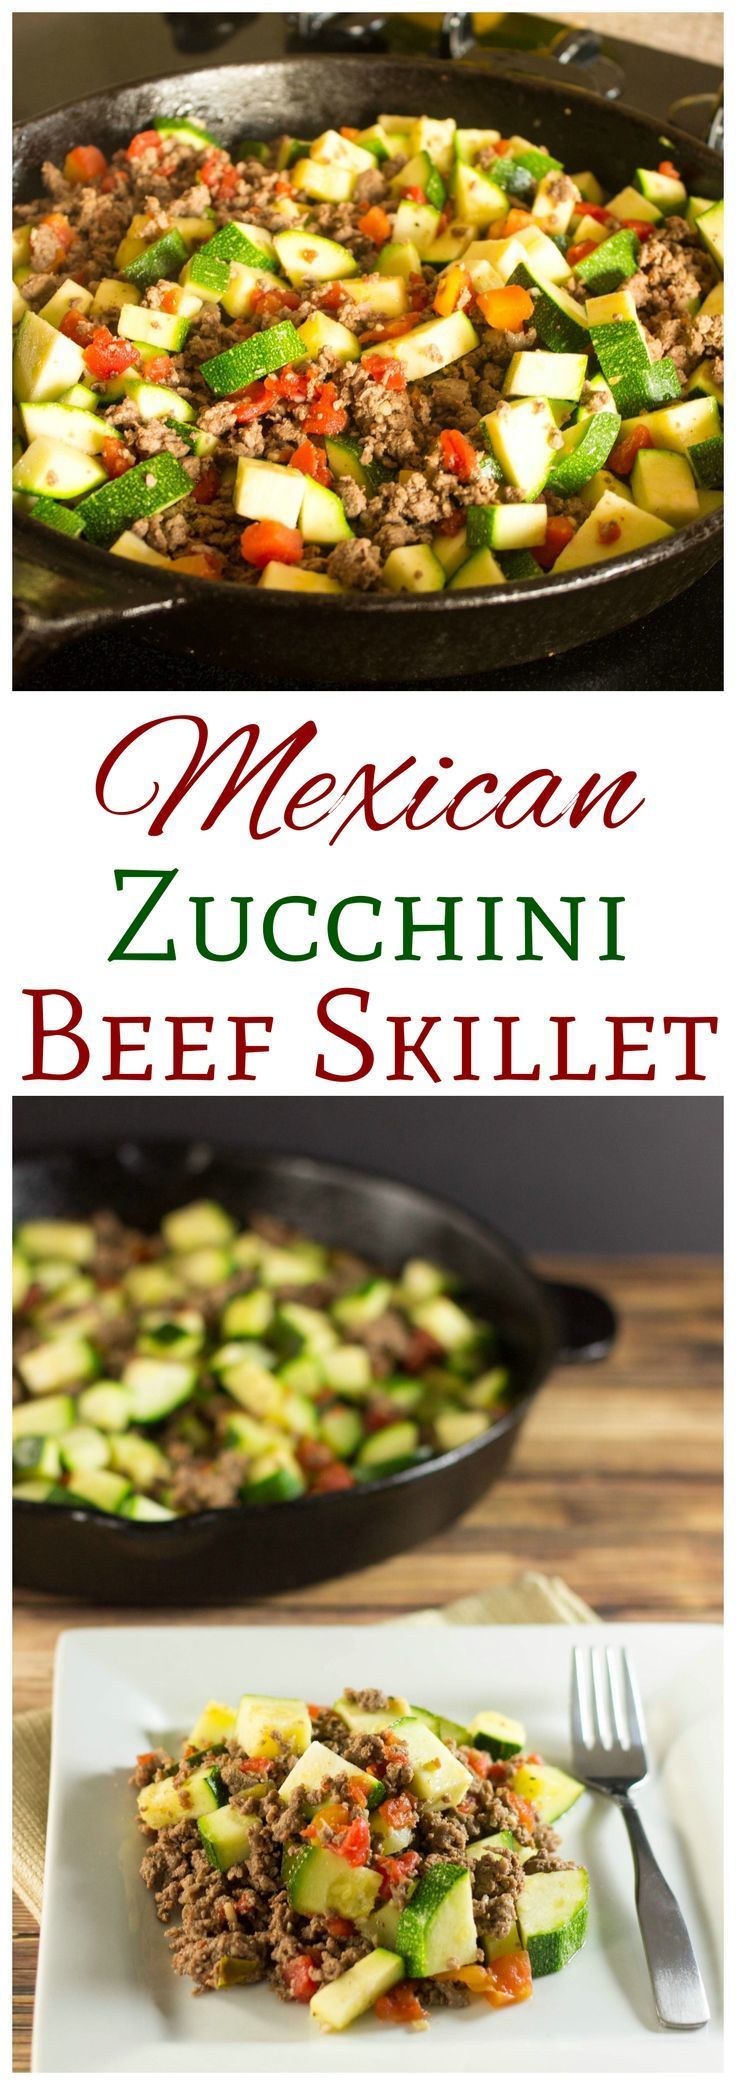 This low carb Mexican zucchini and ground beef recipe is a simple dish made with low cost ingredients. It’s an easy LCHF dinner